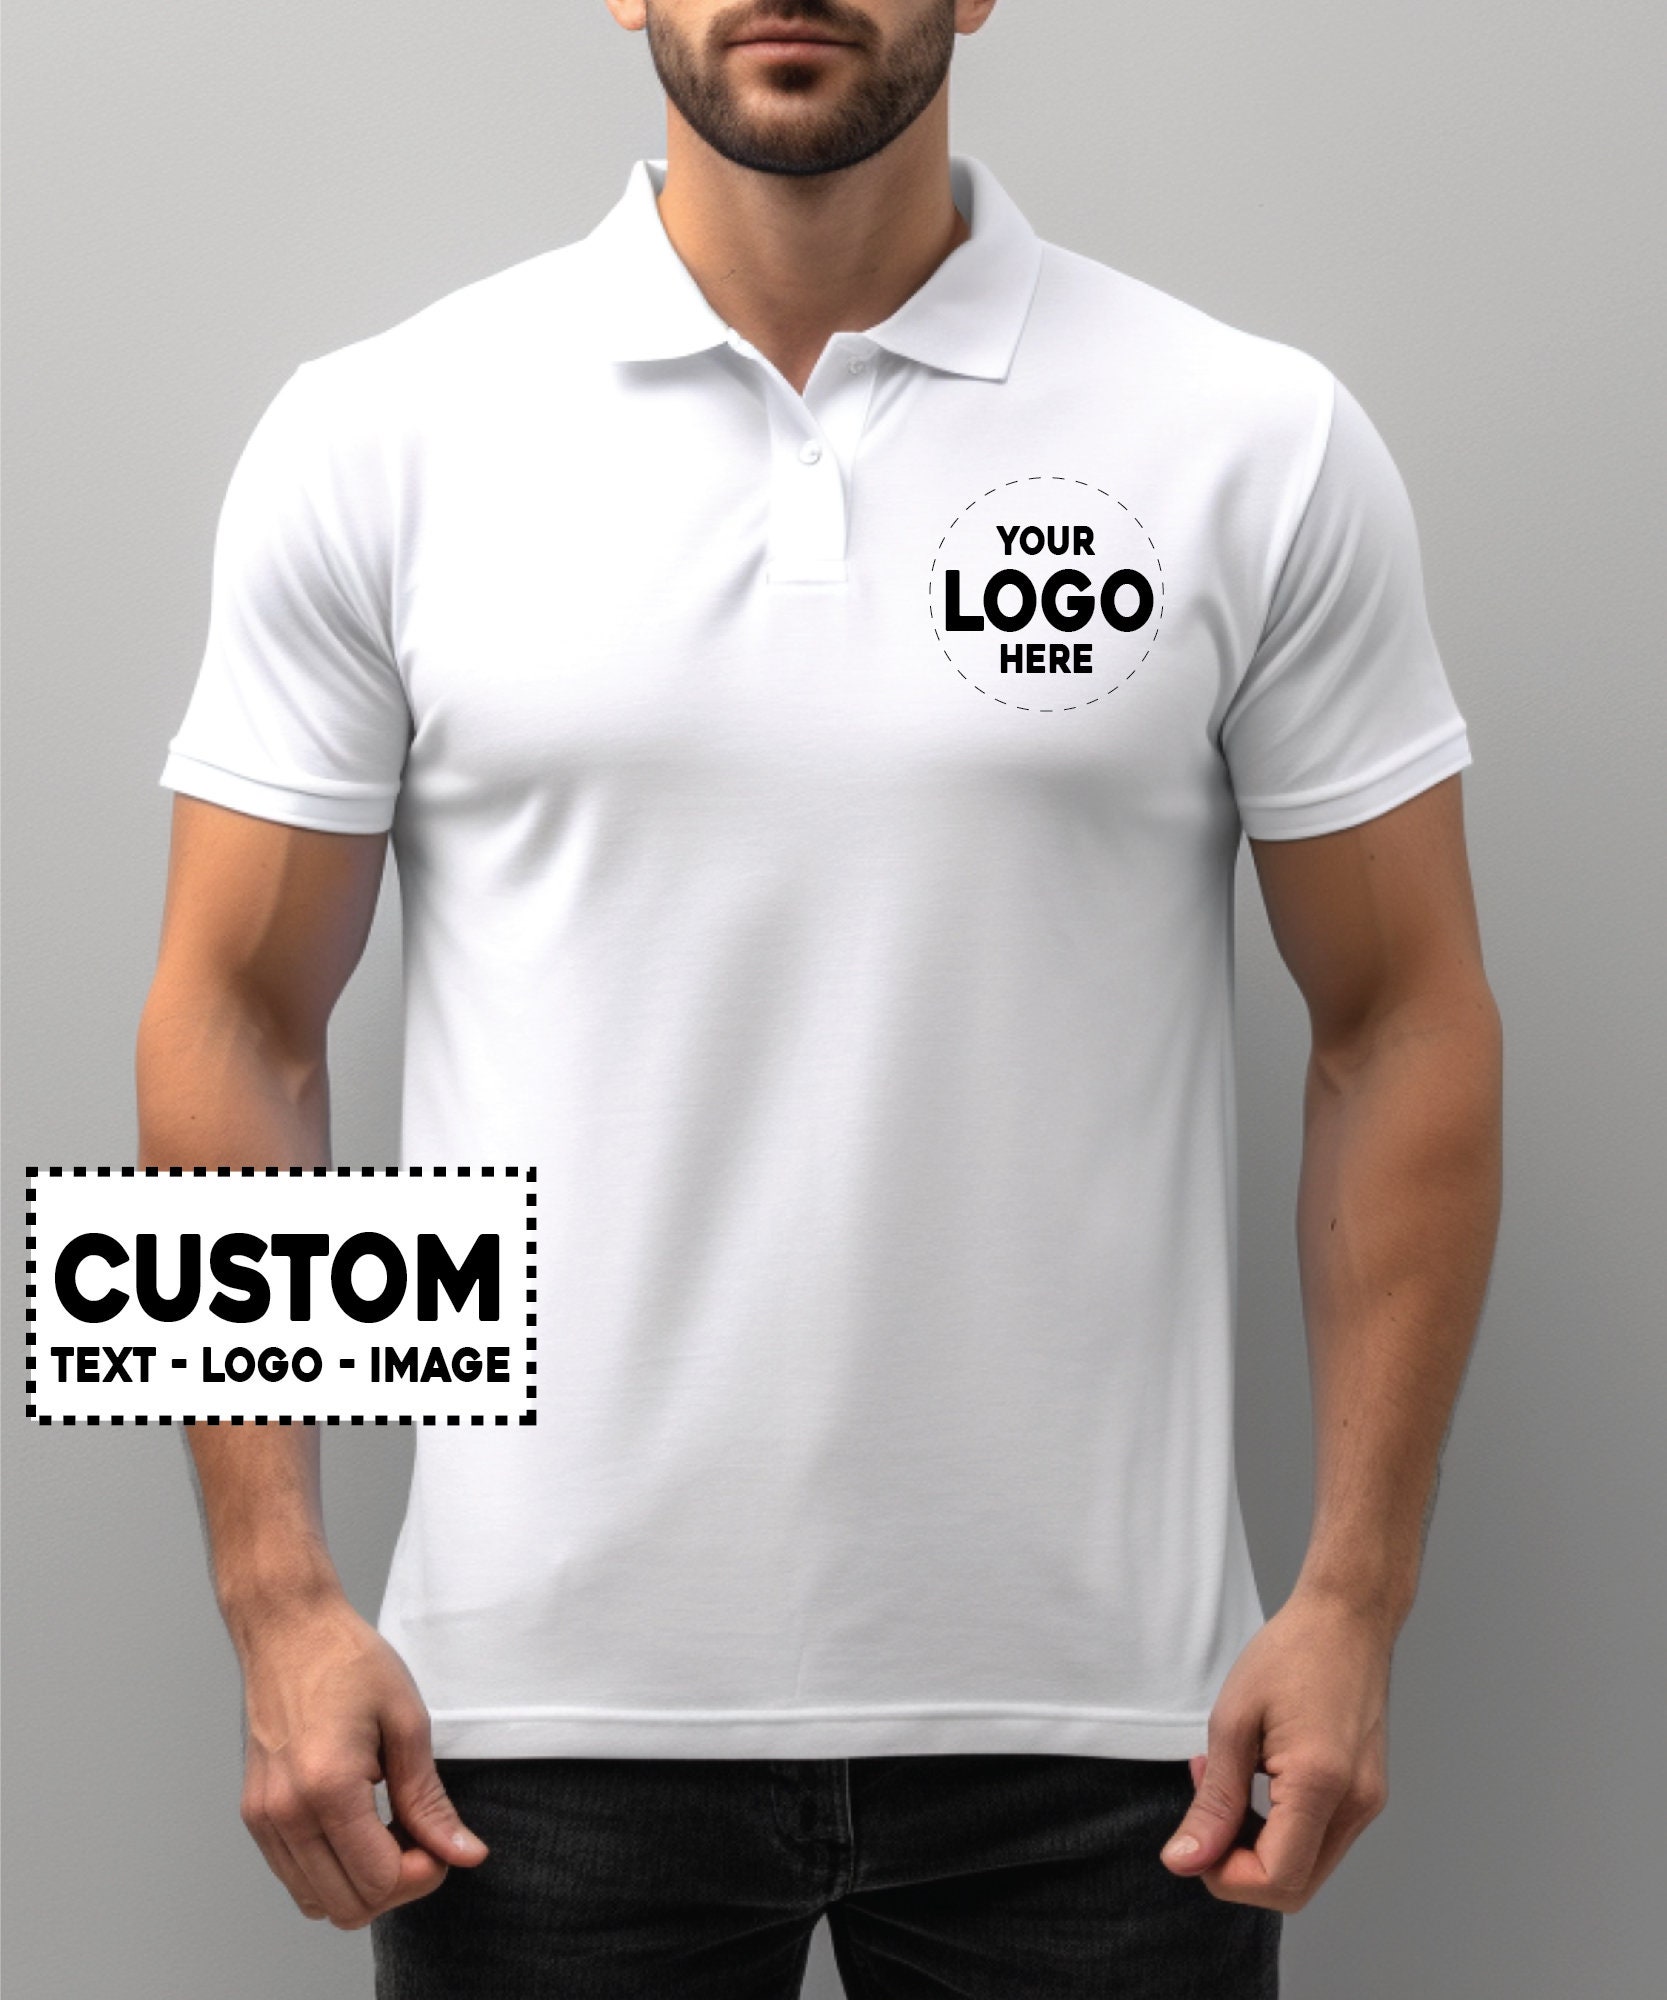 Custom Polo Shirts for Business & Leisure - Customizable, Personalized Logos, Team Golf Apparel, High-Quality Corporate Wear